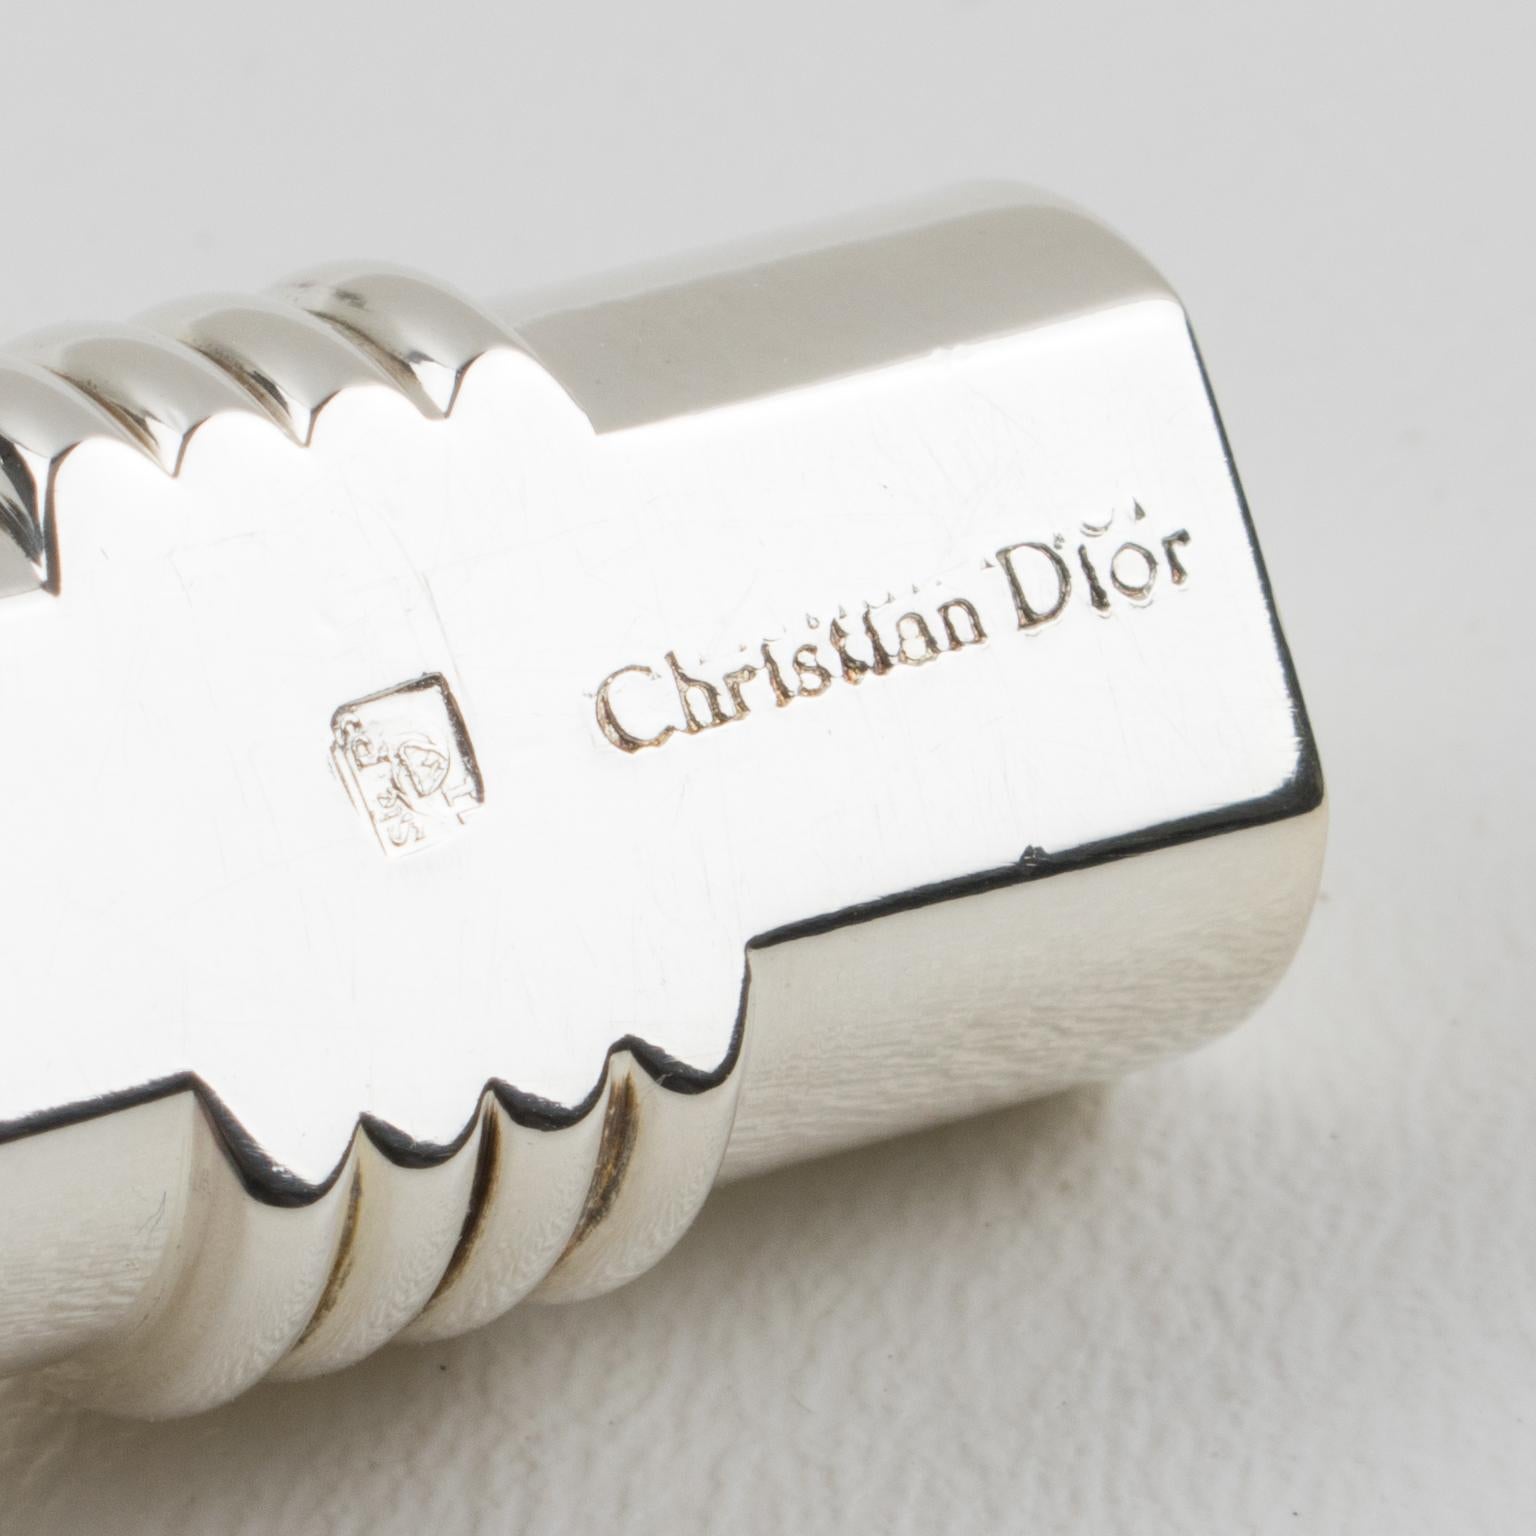 French Christian Dior Silver Plate Chopstick Knife Rests, 6 pieces in Box